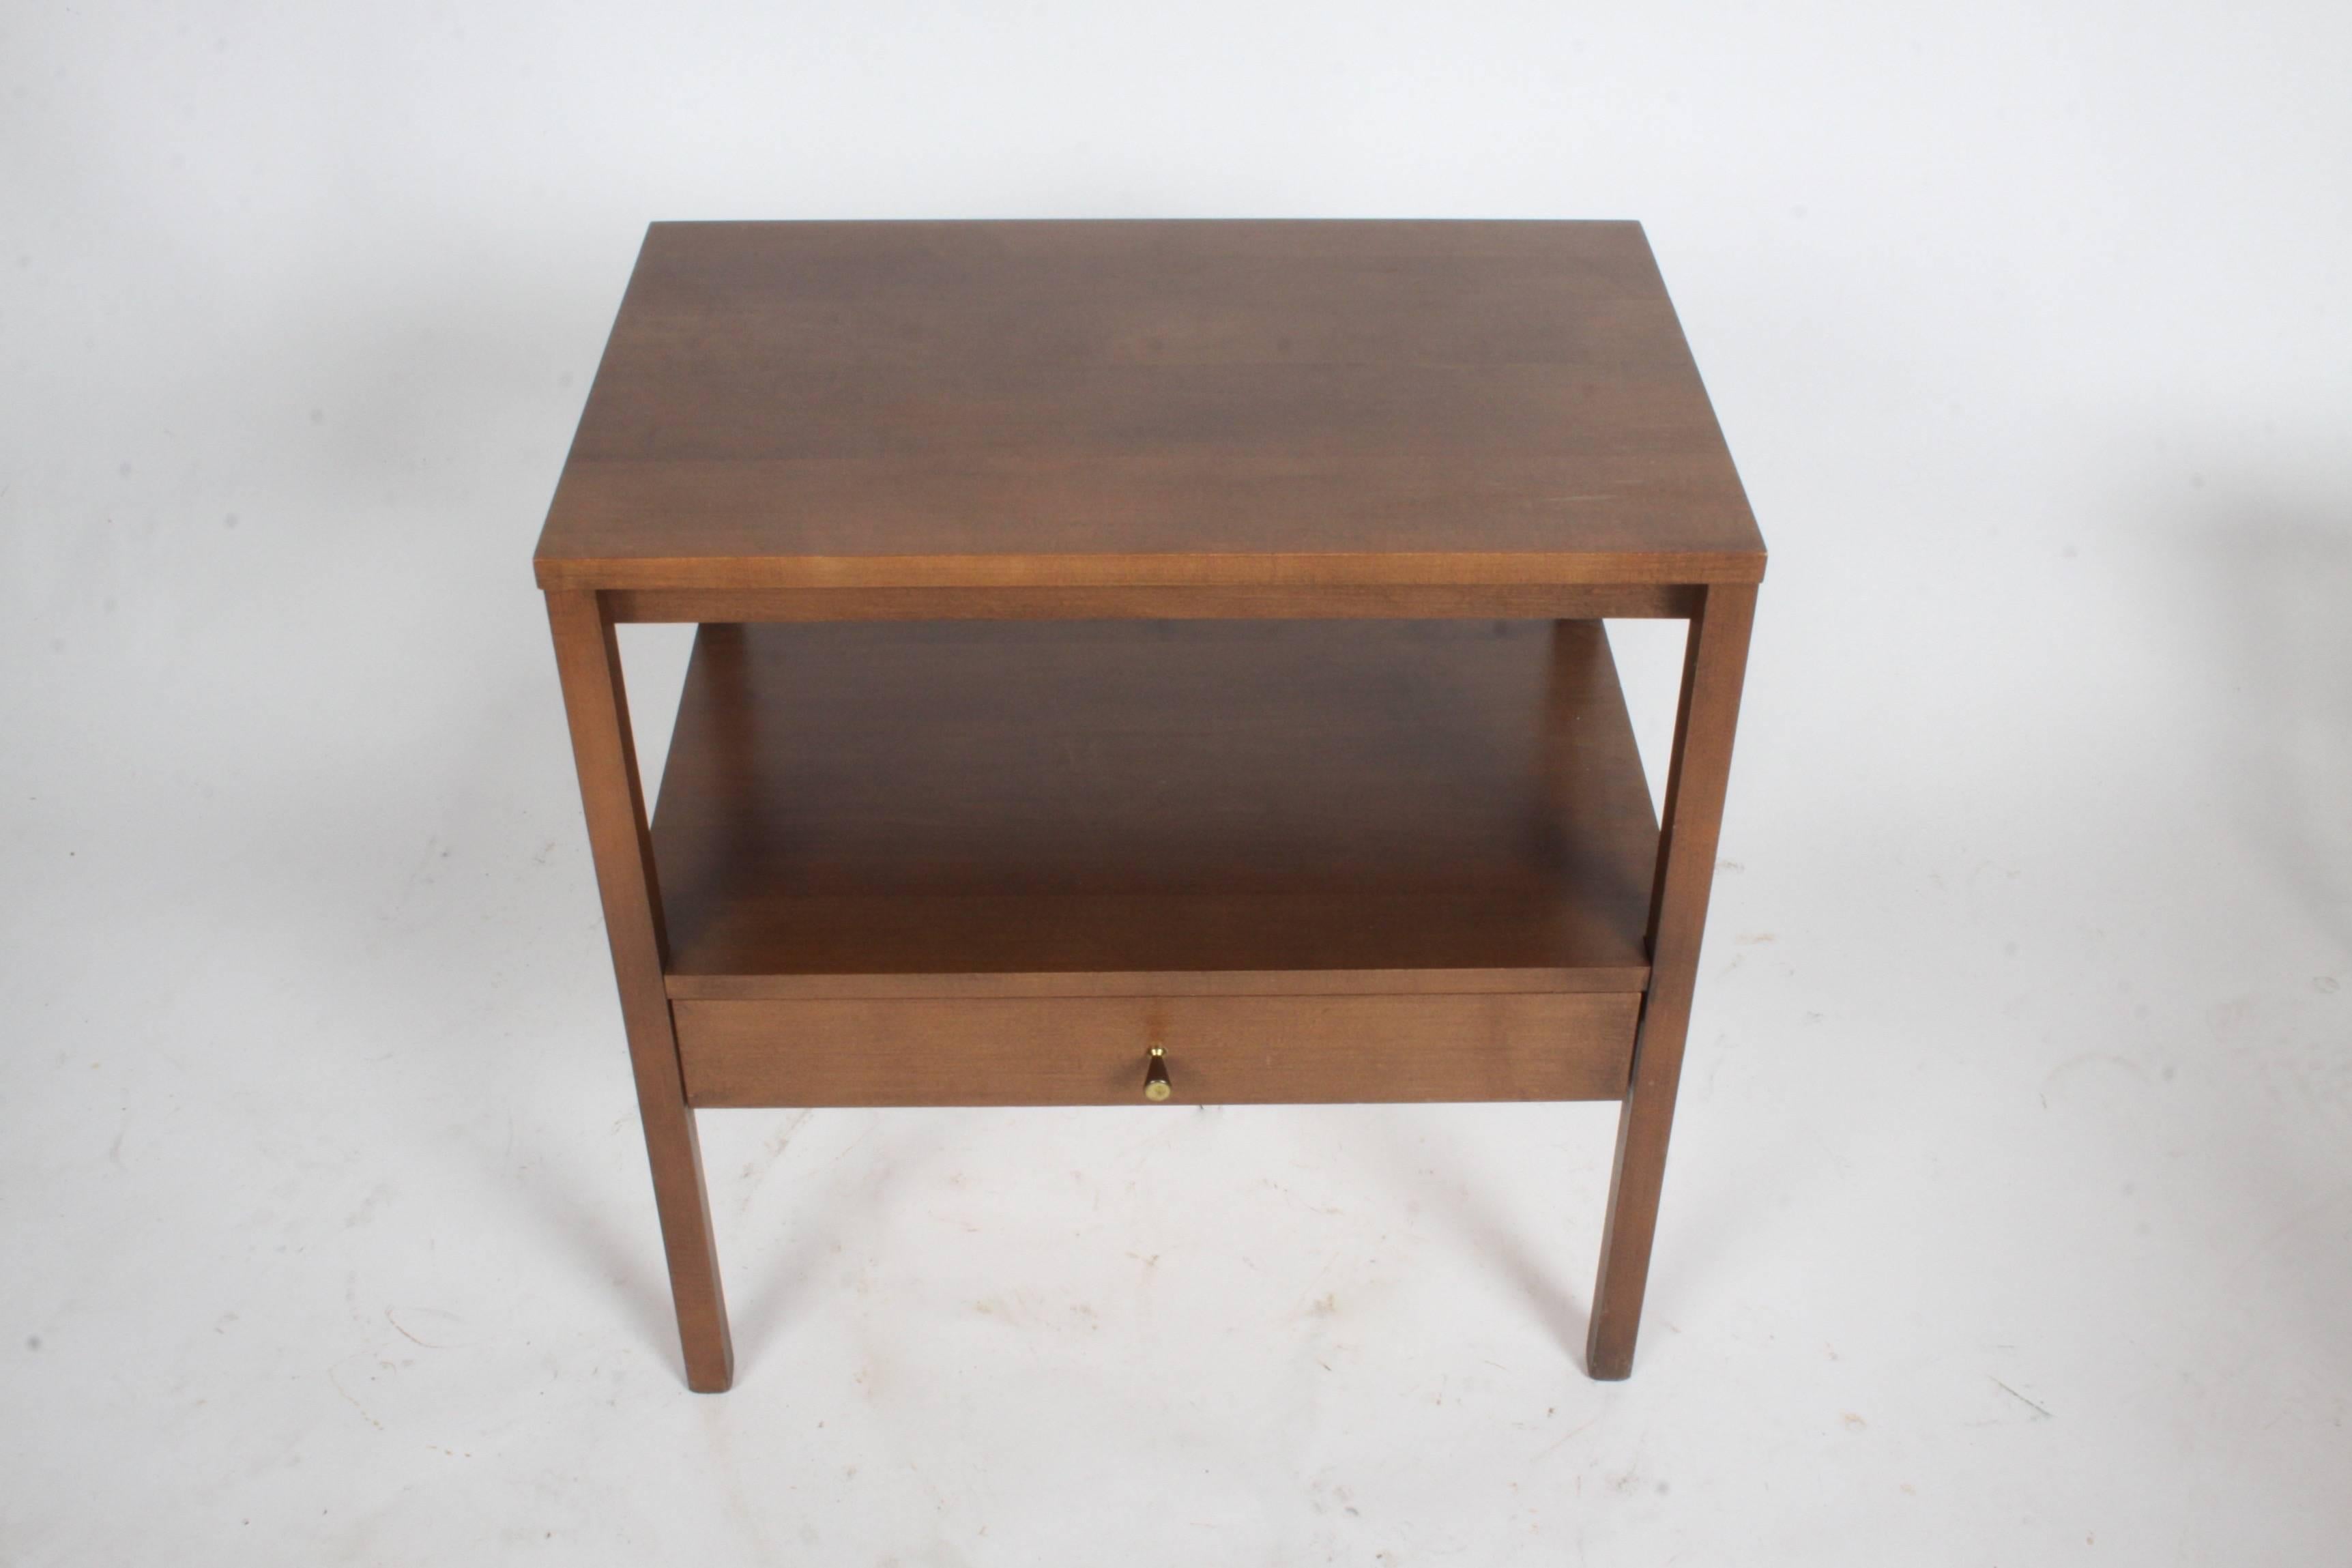 Paul McCobb single end table or nightstand for Planner Group with original finish. Labelled, brass cone pull. Overall very nice original finish. Can be refinished in a darker color for additional cost.